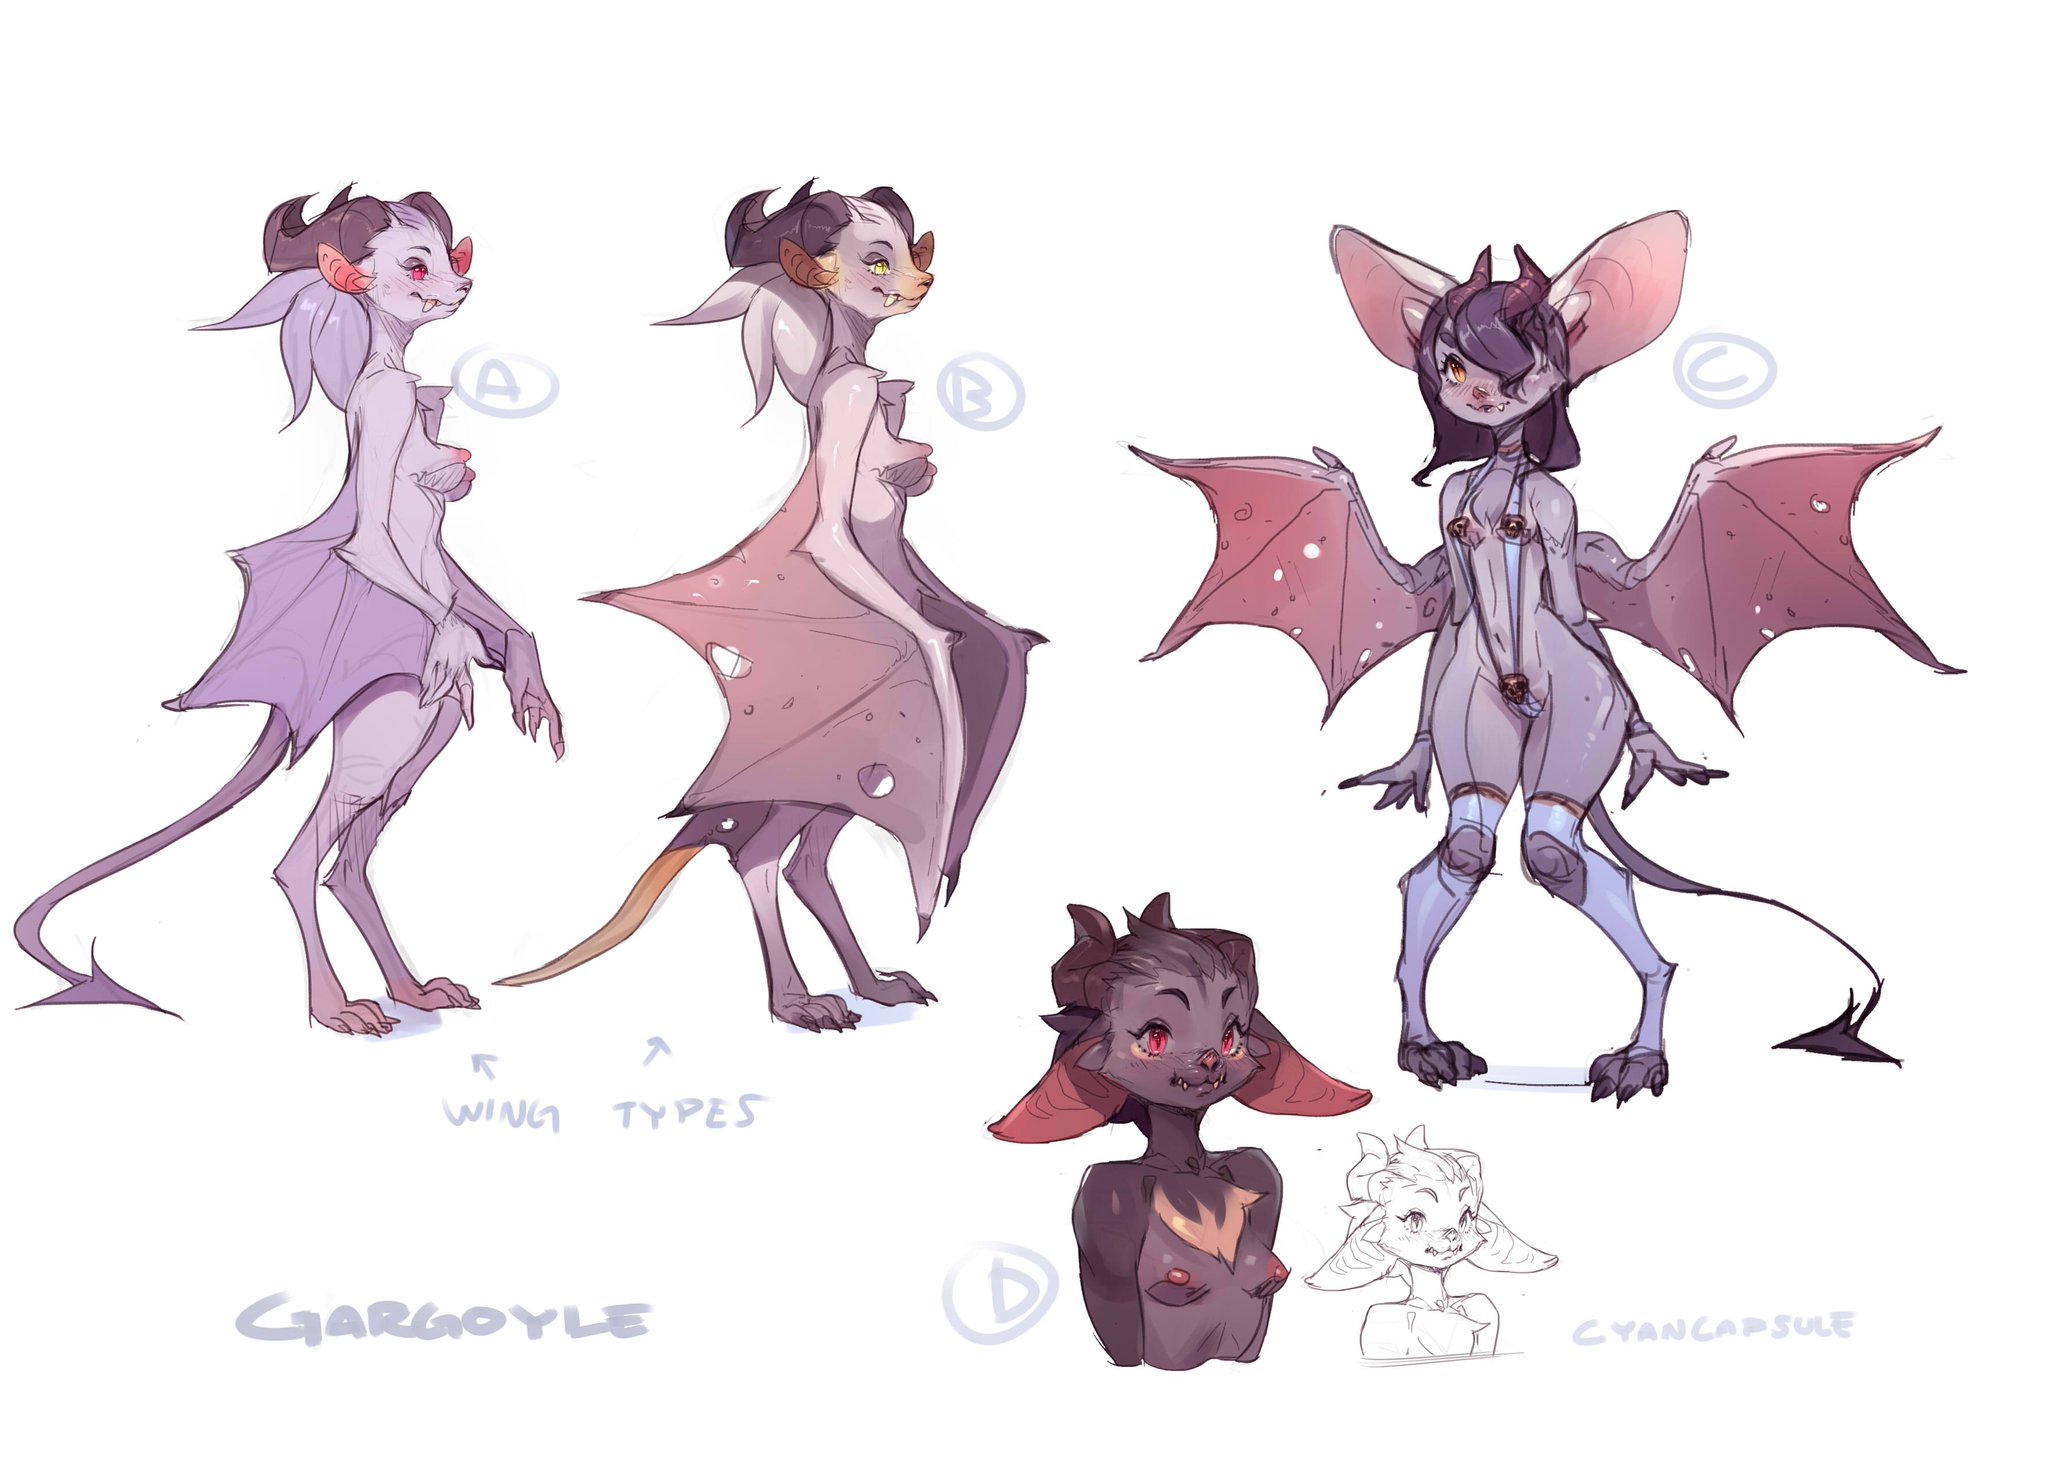 Cyancapsule Ar Twitter Gargoyle Concepts I Drew For Doxyonta S Sexena Game Consider Supporting The Project Over At T Co Yintoynfye T Co Hrosnofldt